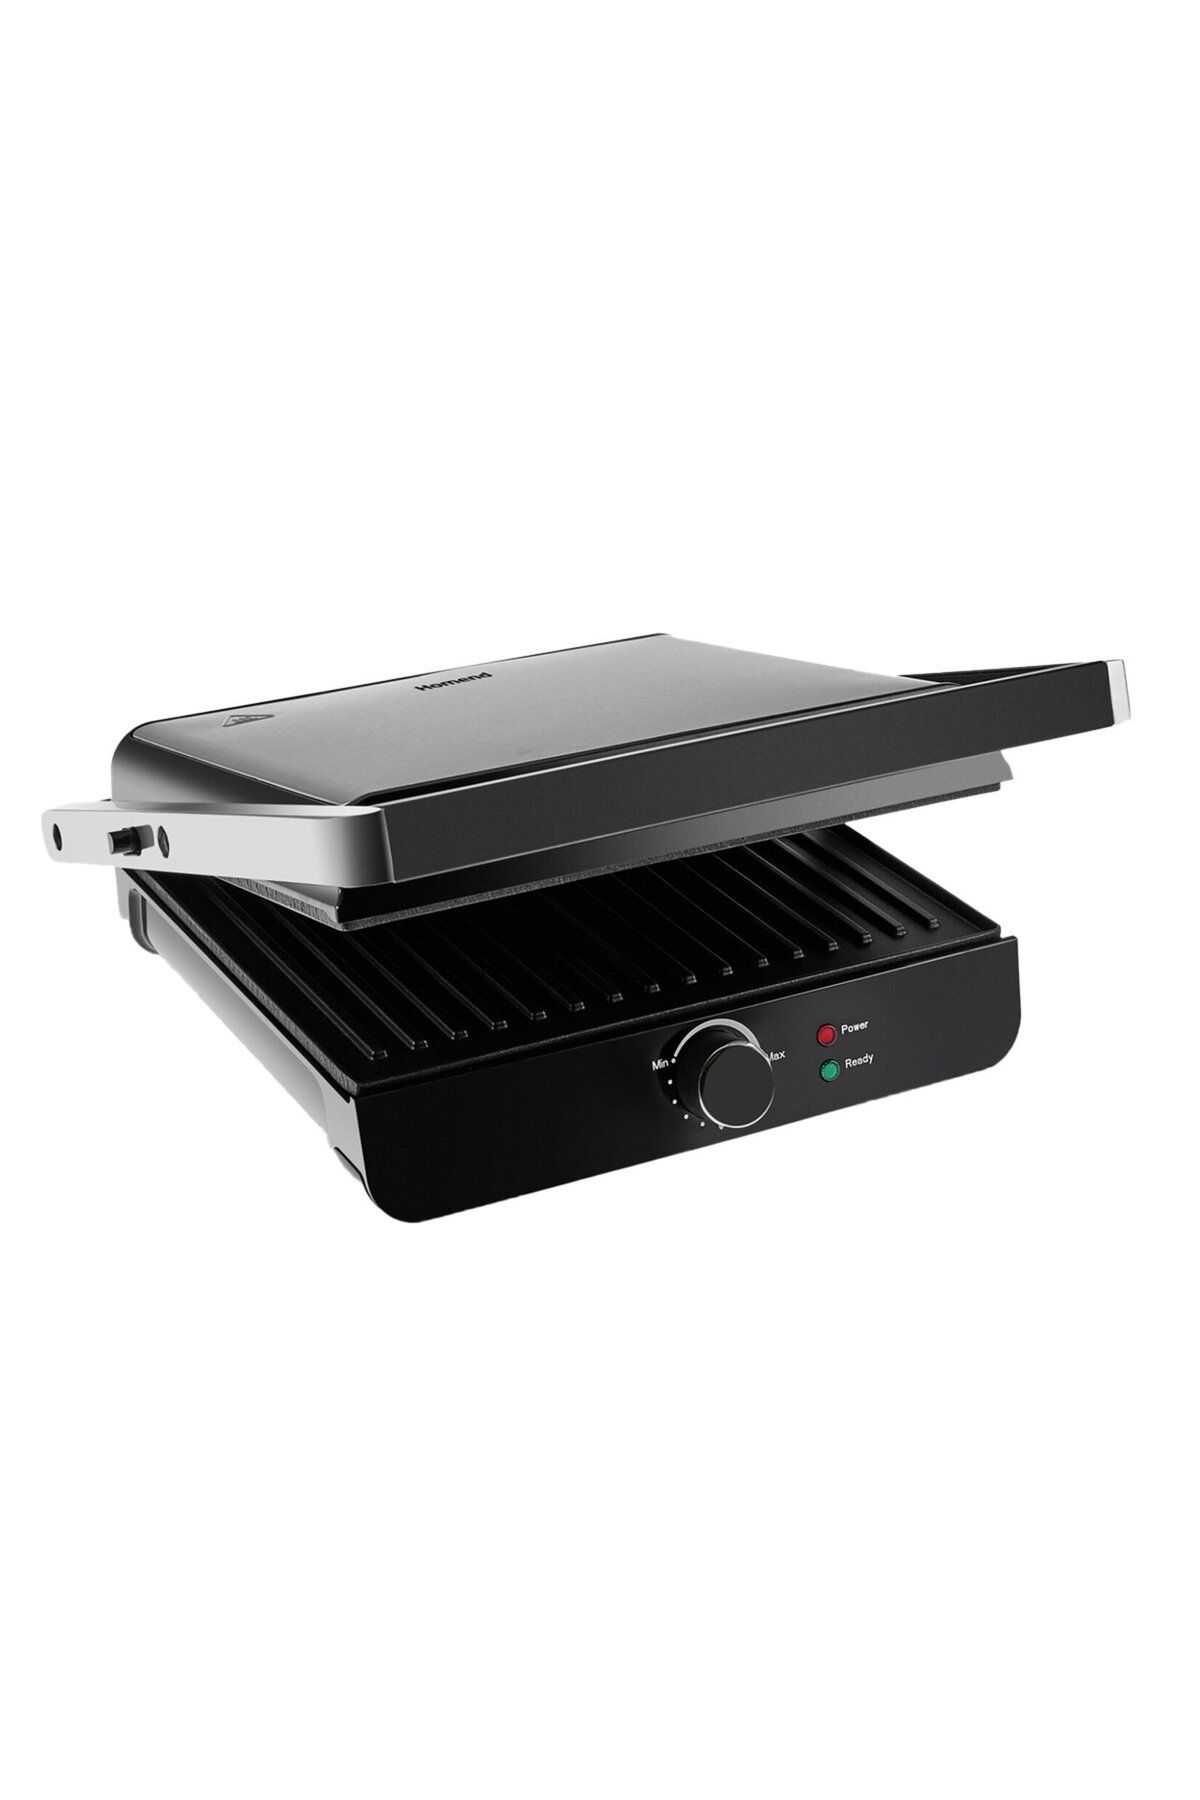 HOMEND Grillant 1356h Inox Grill Ve Tost Makinesi